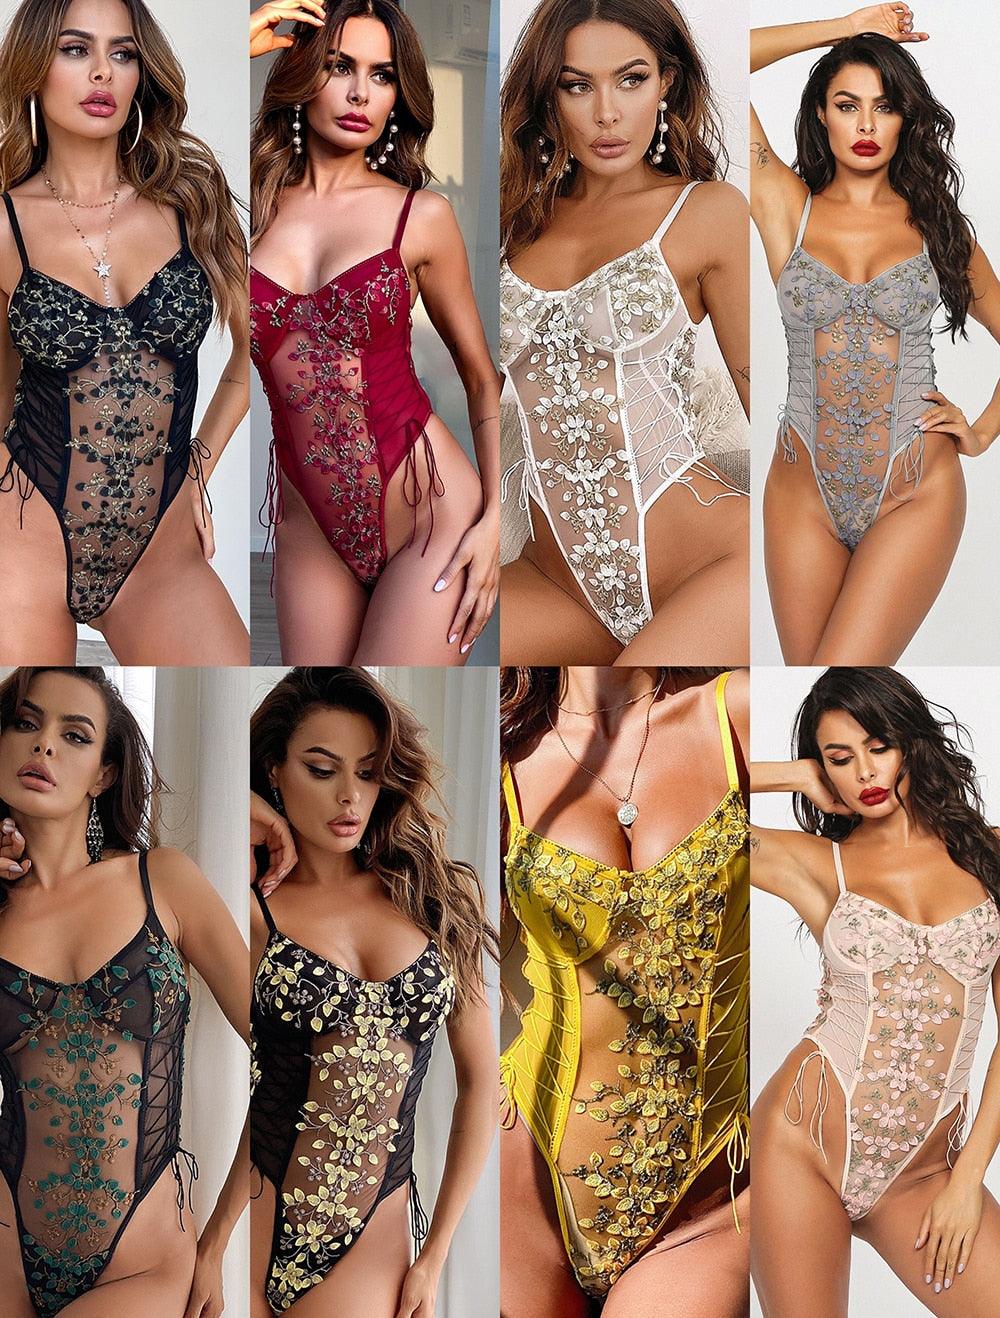 T-BOO Women Bodysuit Floral Embroidery Lace Up Bandage Bodysuits Sexy Sleeveless Bodycon Transparent Mesh Lingerie